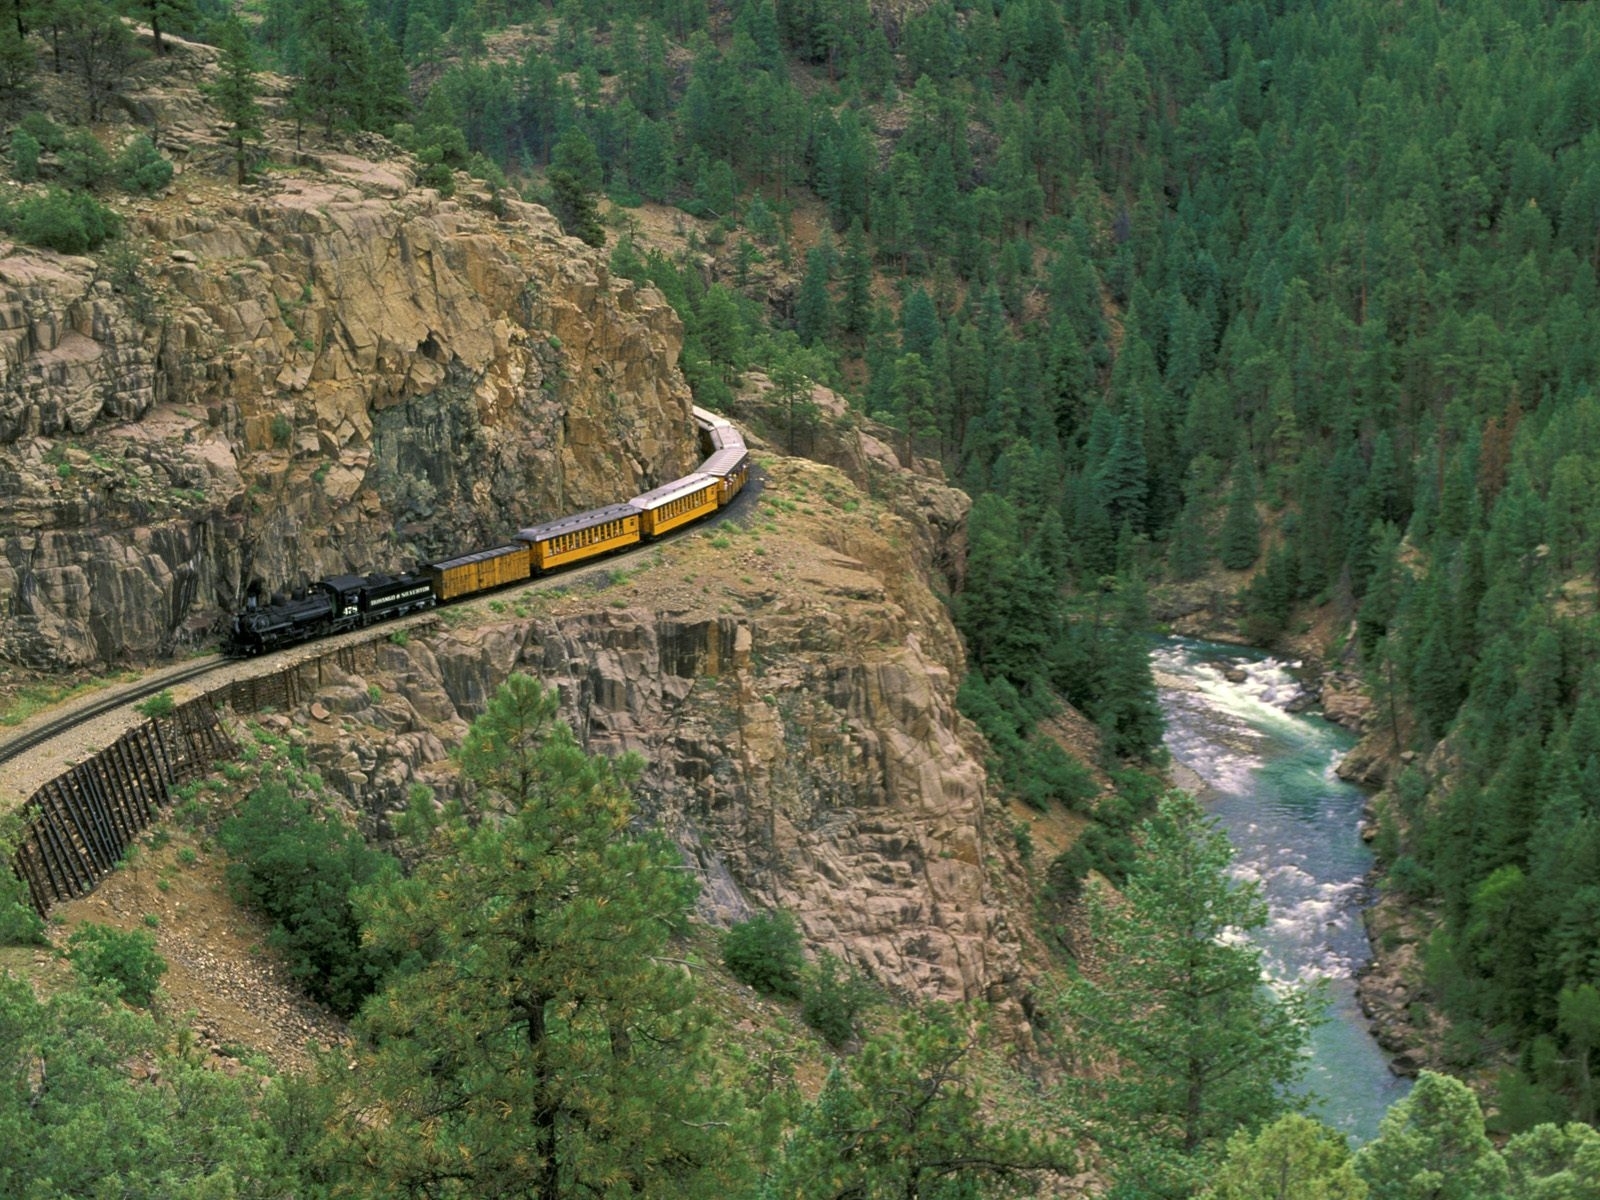 trains, mountains, transport, landscape, rivers, trees, green lock screen backgrounds